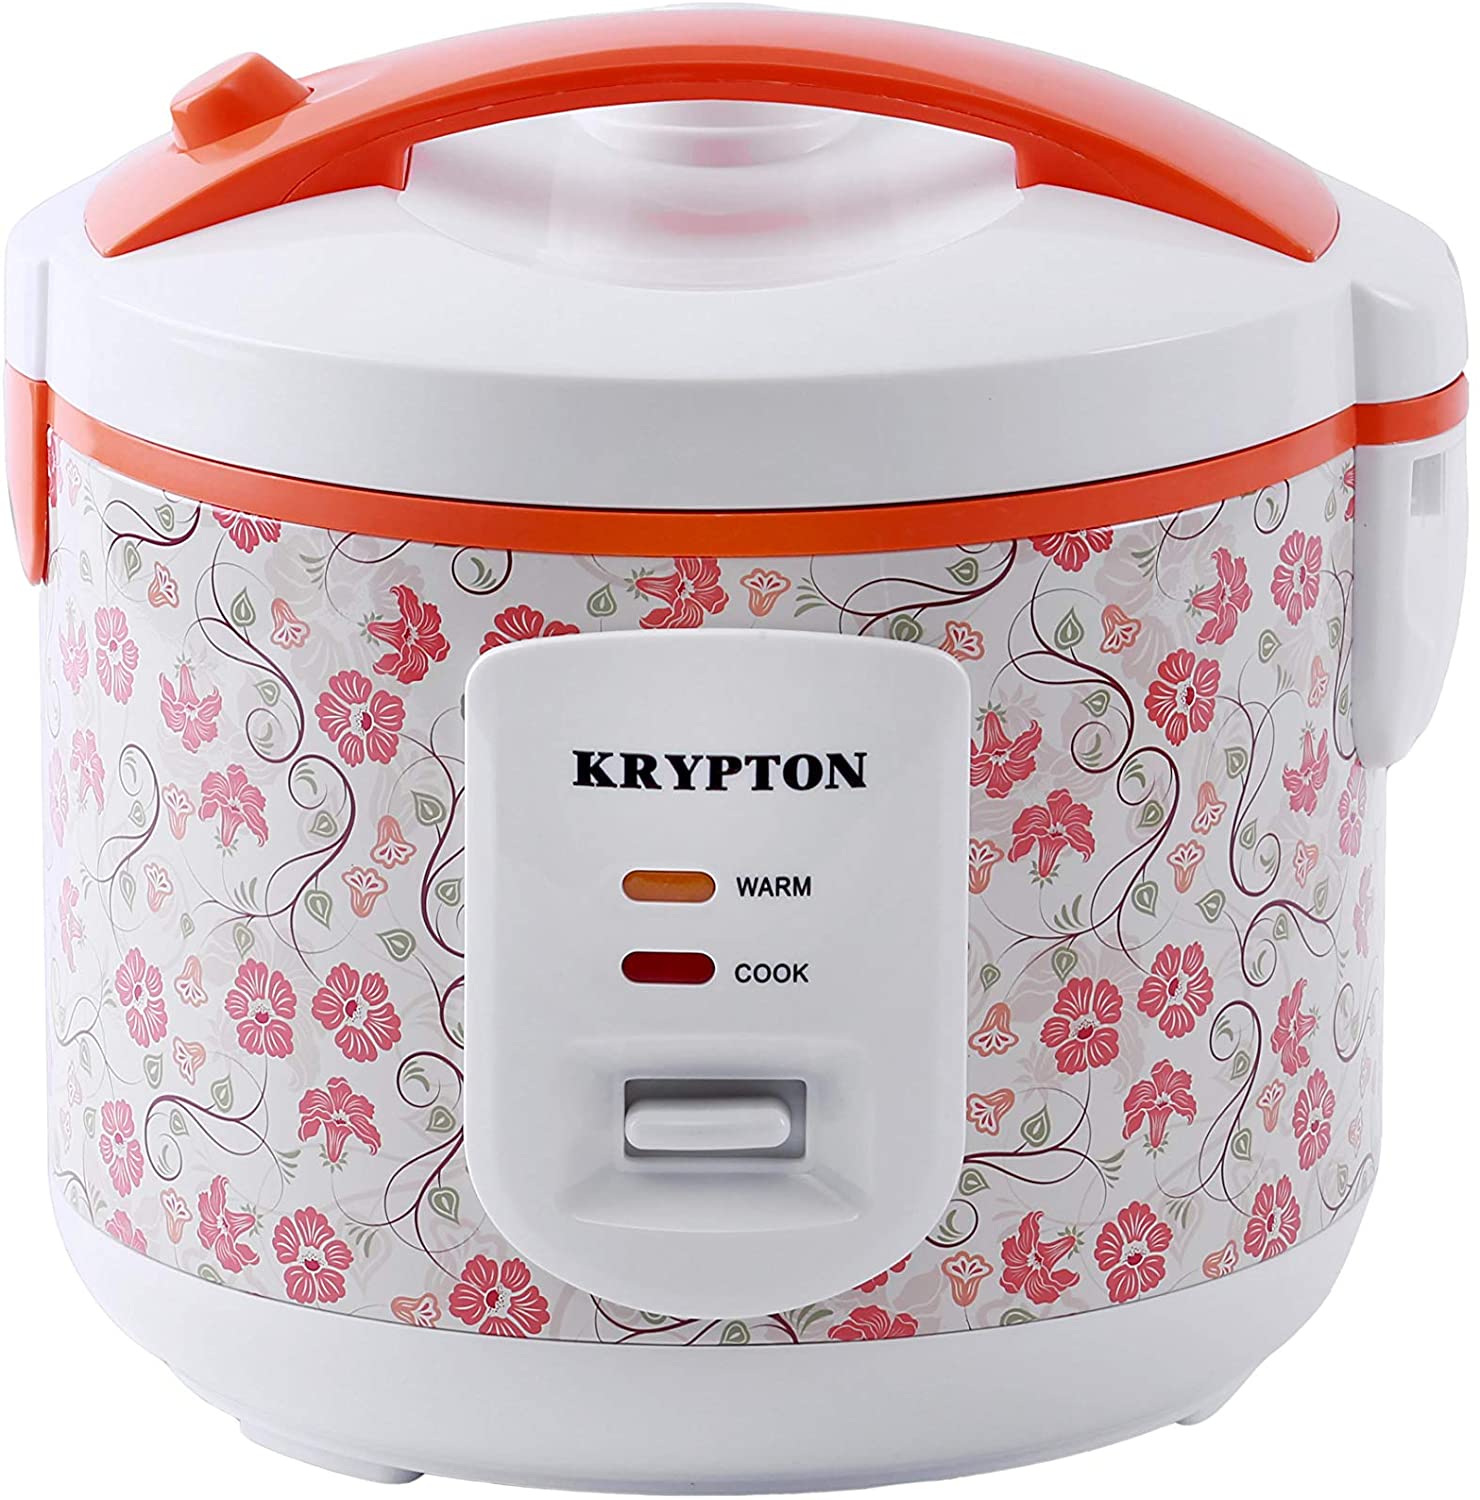 Krypton 1.5L Electric Rice Cooker With Steamer White & Orange